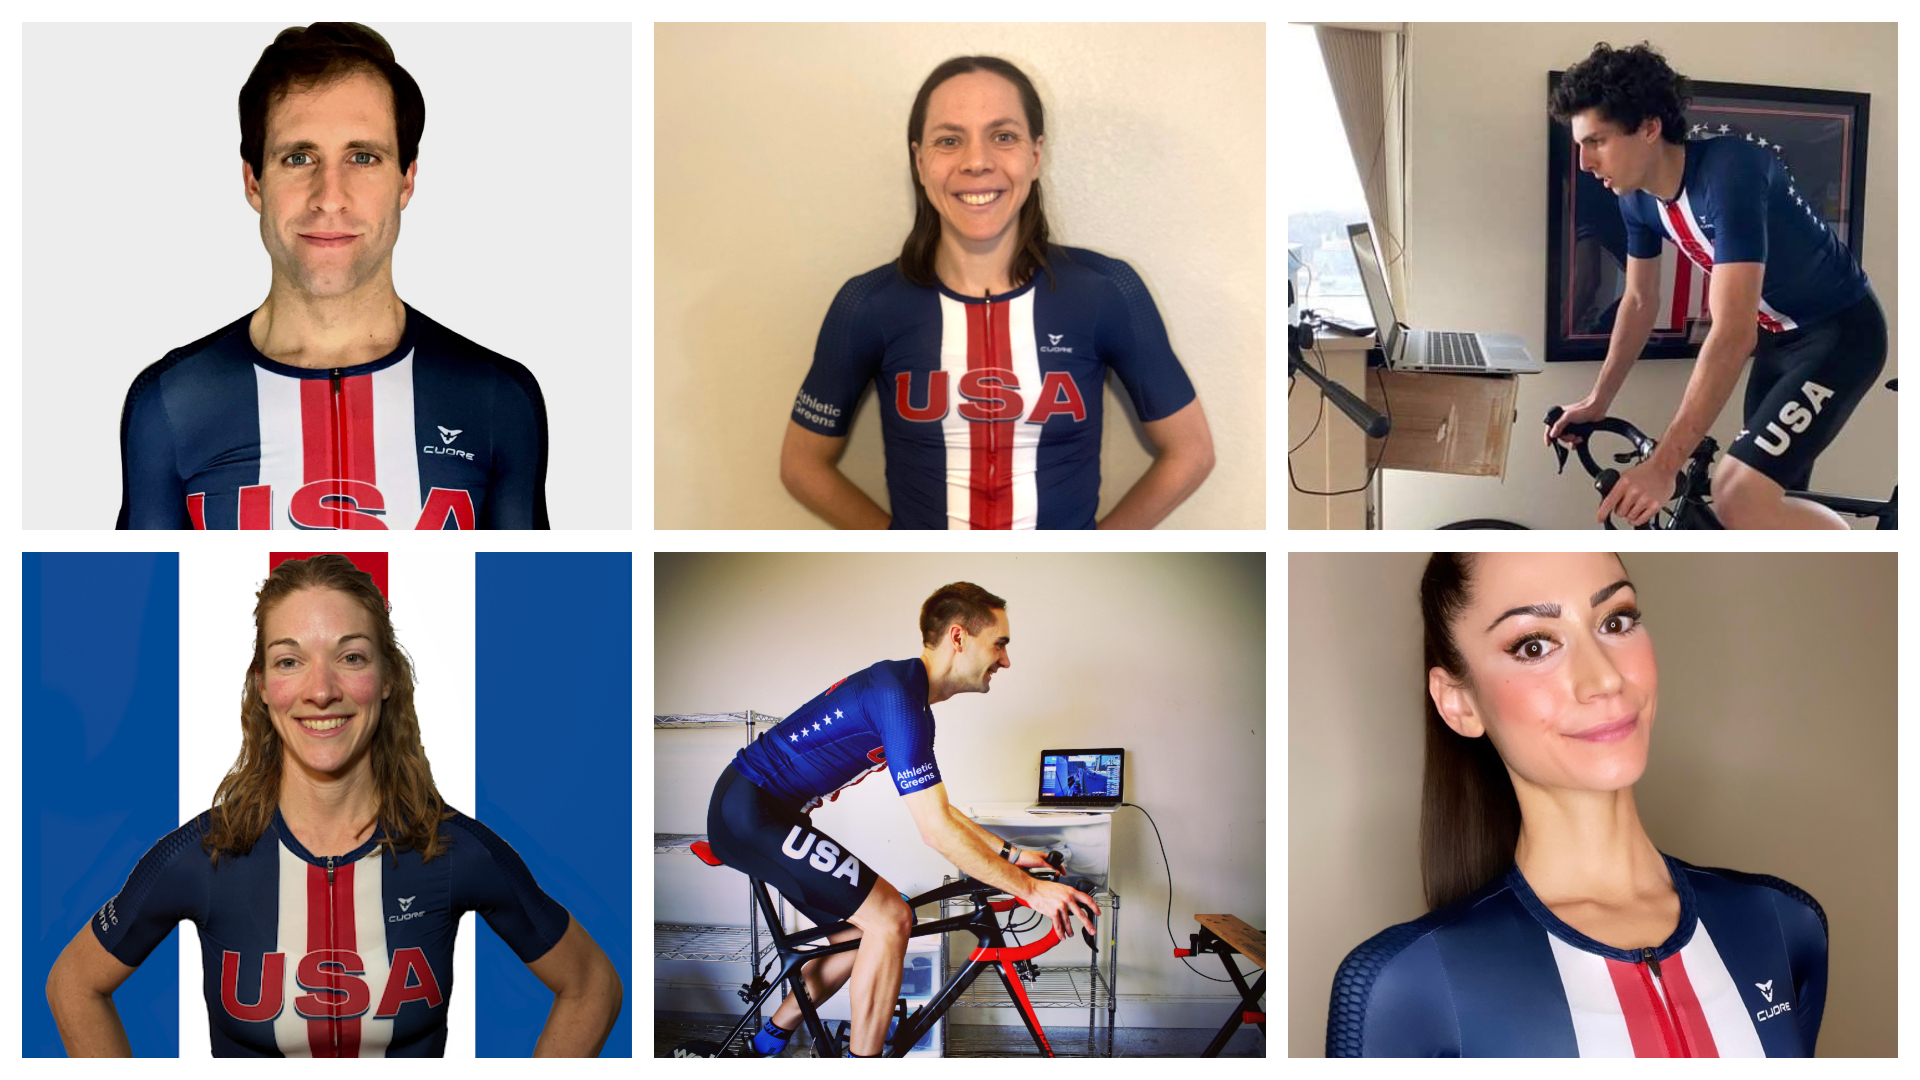 Team USA could home rainbow jersey at the Esports World Championship this weekend | Cycling Weekly